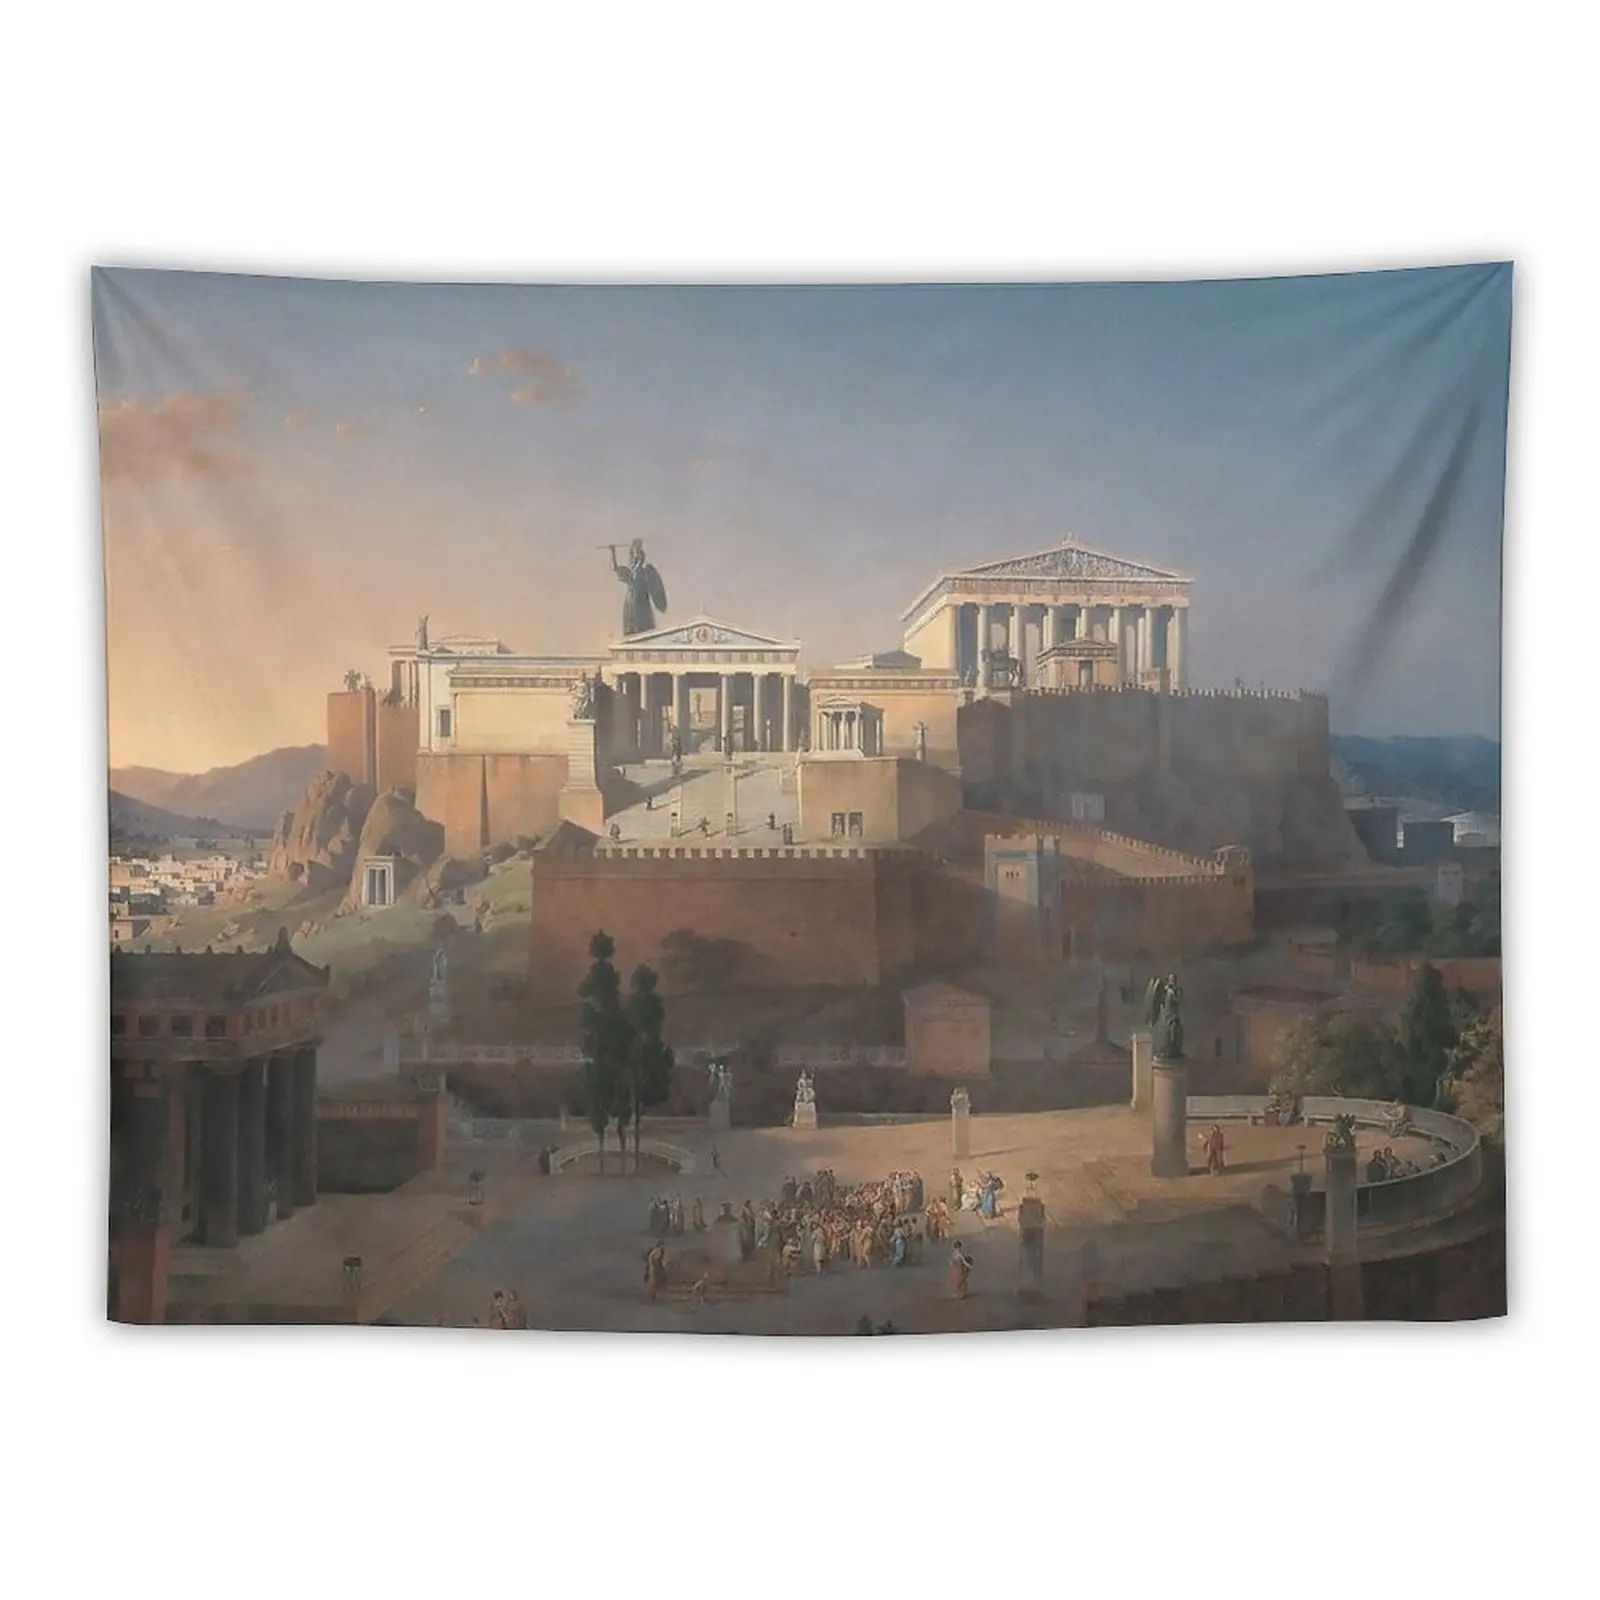 

Acropolis of Athens Tapestry Room Decore Aesthetic Room Aesthetic Decor Living Room Decoration Outdoor Decor